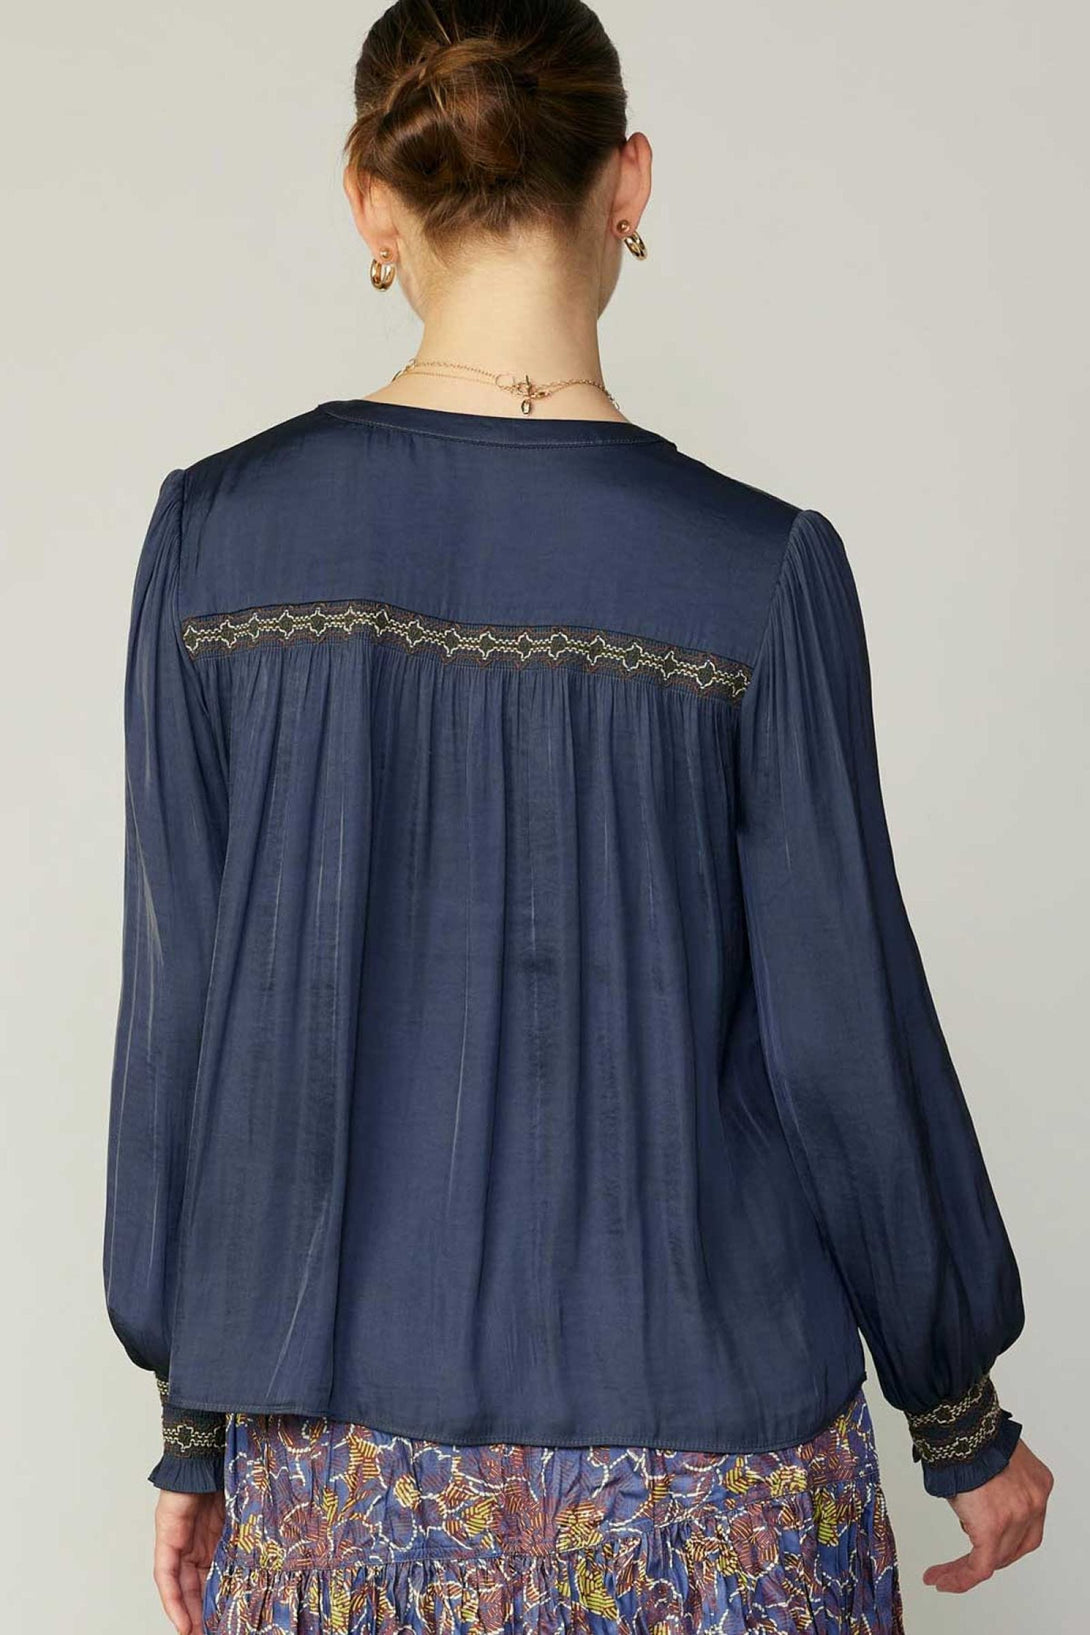 Current Air Long Sleeve Blouse with Special Smocking on Chest and Cuffs